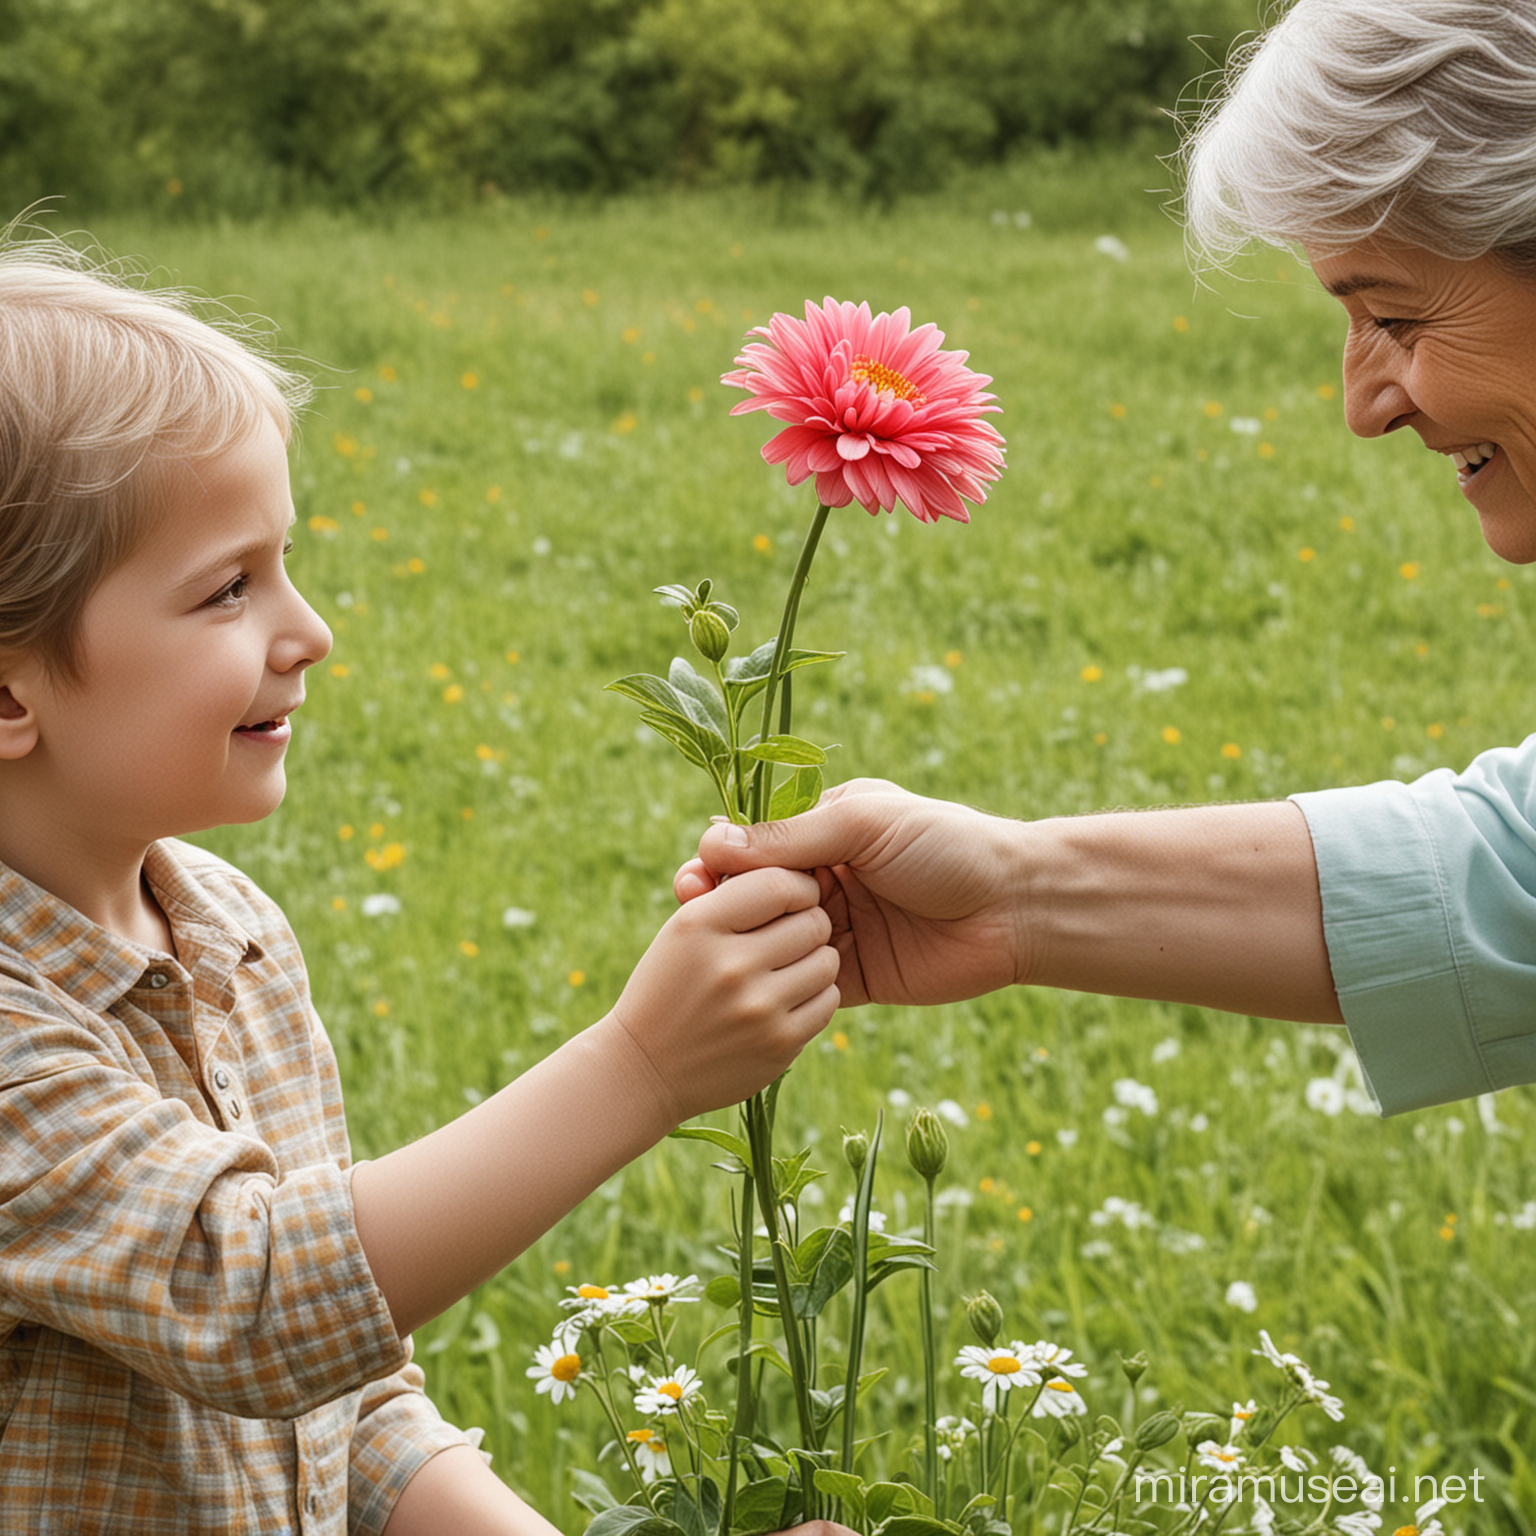 Image showing a child giving an elderly person a flower
